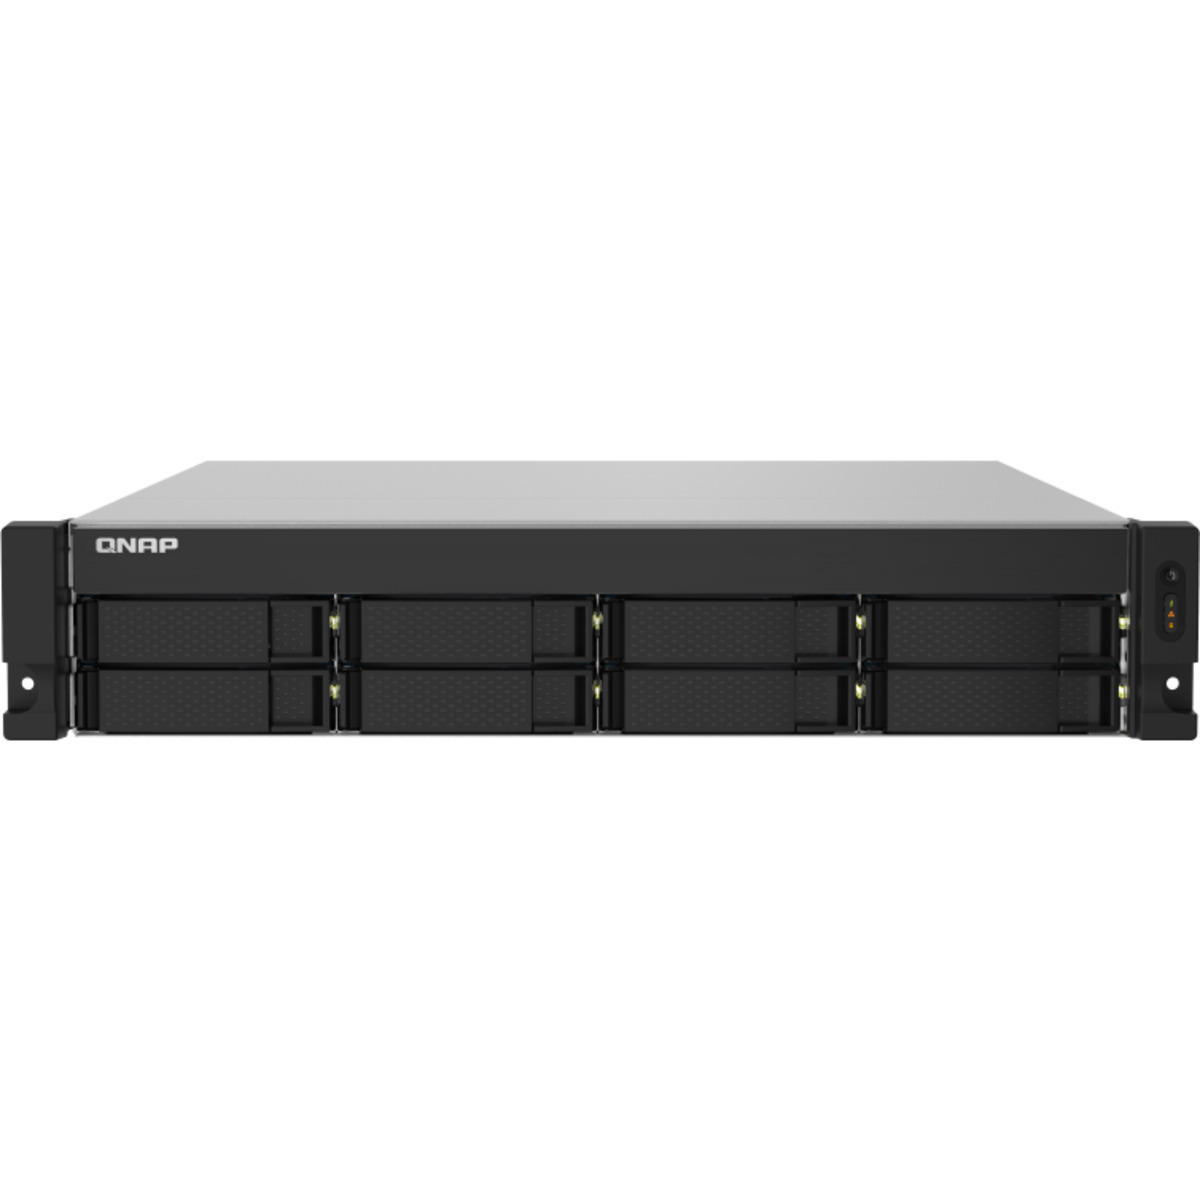 QNAP TS-832PXU-RP 14tb 8-Bay RackMount Personal / Basic Home / Small Office NAS - Network Attached Storage Device 7x2tb Sandisk Ultra 3D SDSSDH3-2T00 2.5 560/520MB/s SATA 6Gb/s SSD CONSUMER Class Drives Installed - Burn-In Tested - FREE RAM UPGRADE TS-832PXU-RP